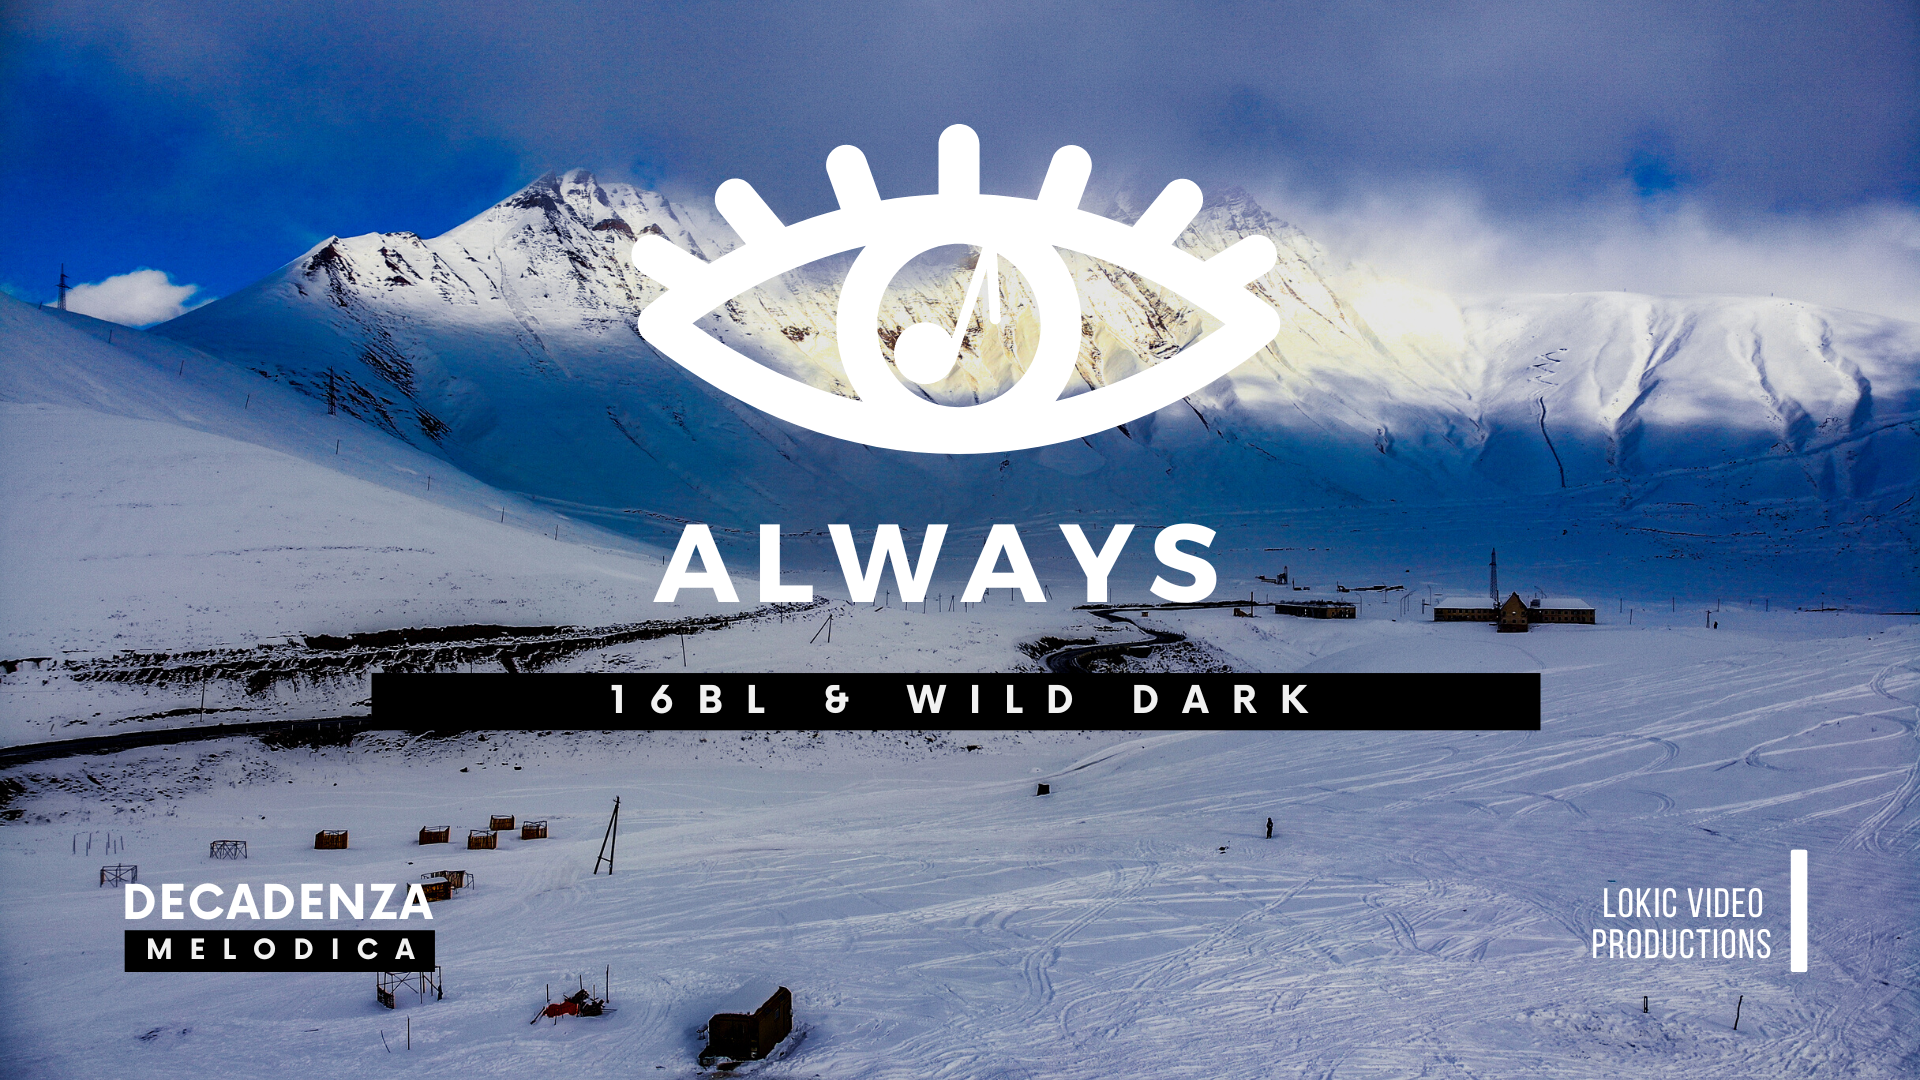 16BL – Always | Melodic House